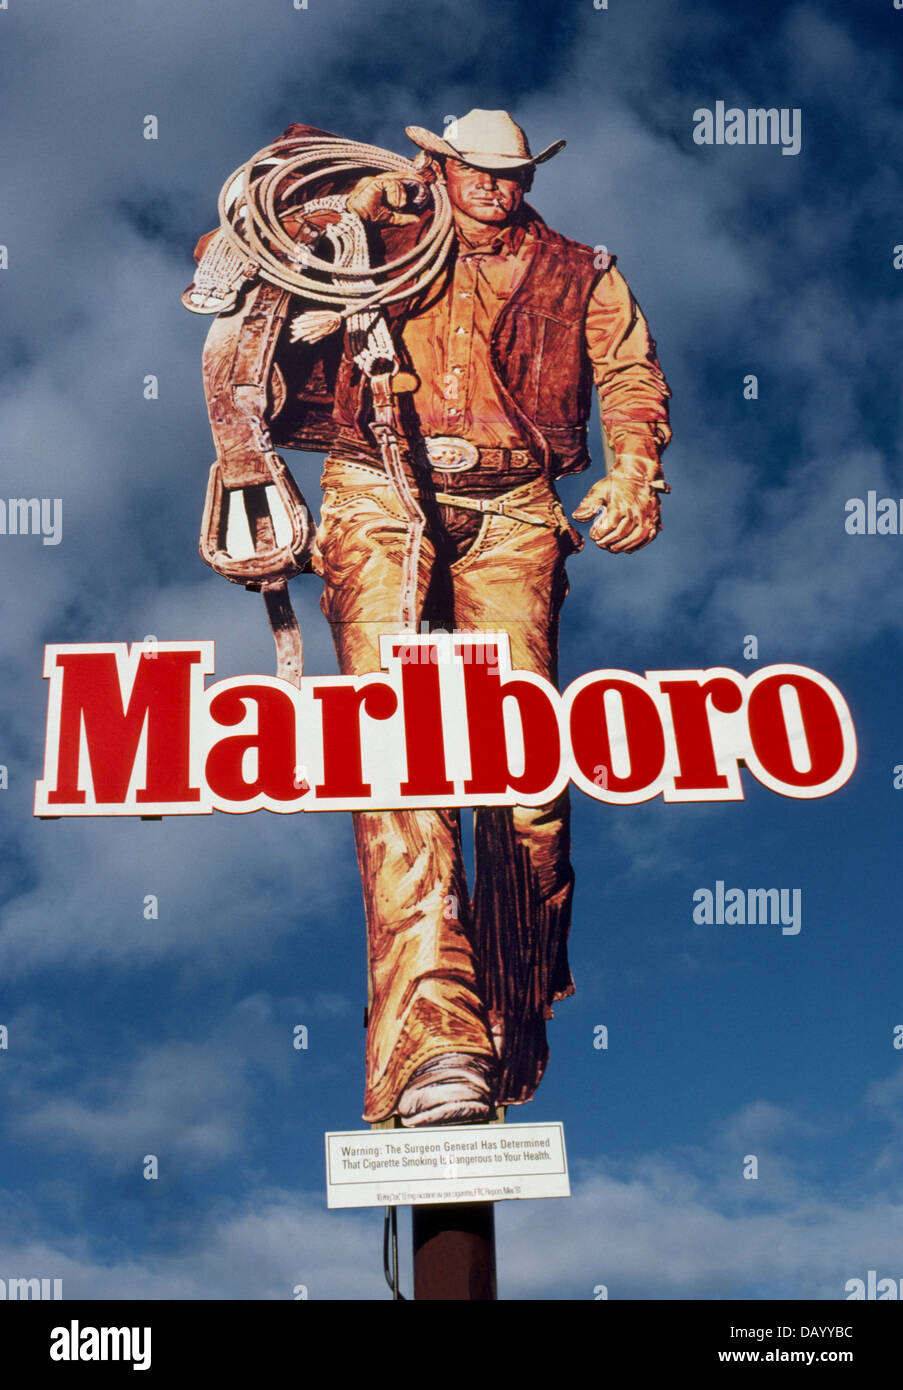 The Marlboro Man depicted by cowboys like this one on an outdoor sign in the USA was introduced in 1954 to promote smoking of filtered cigarettes. Stock Photo